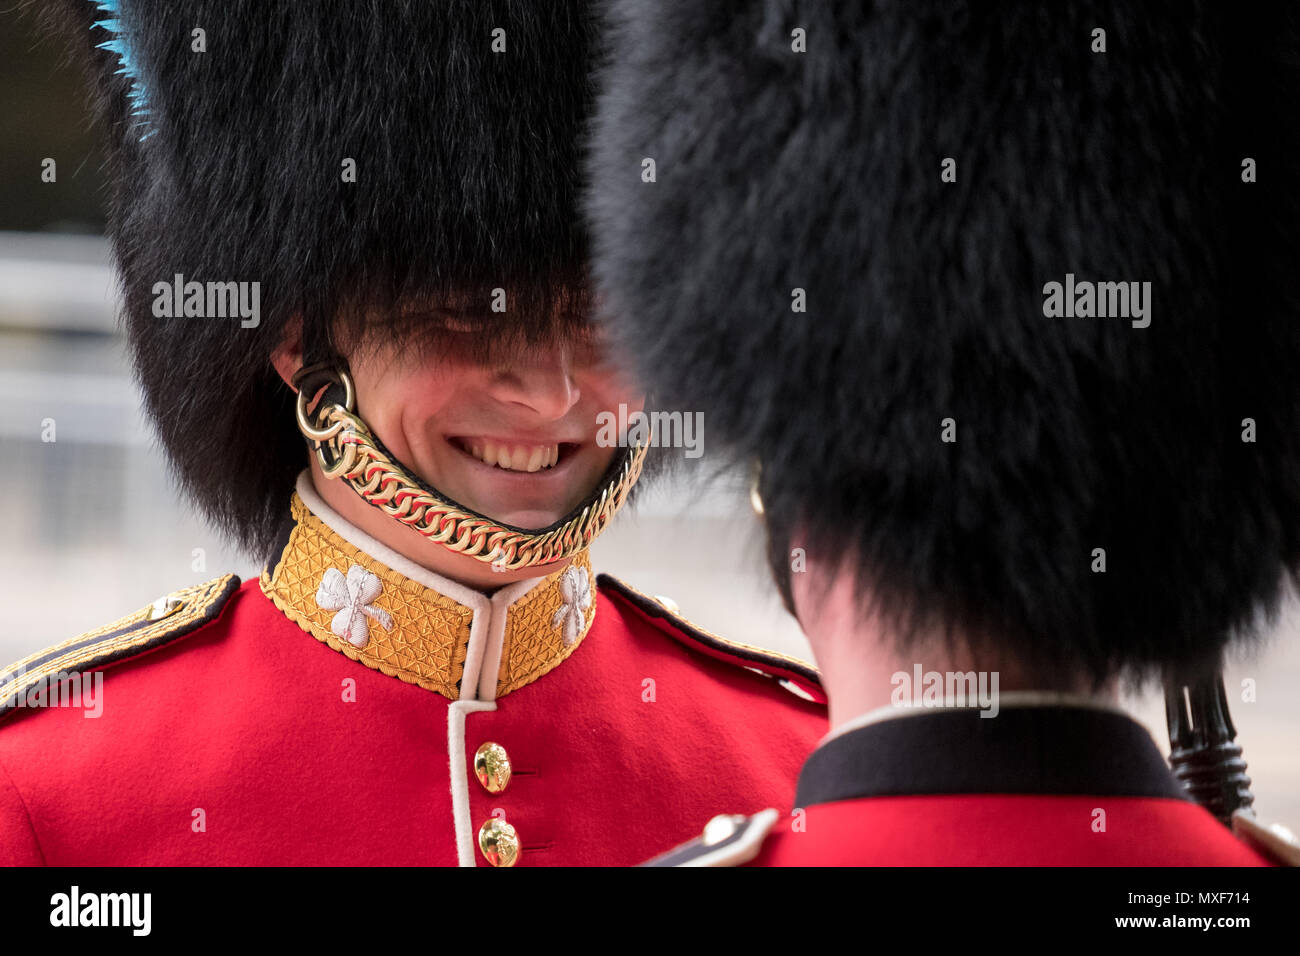 Royal Guard soldiers wearing red and black uniform and bearskin hats  sharing a joke during the Trooping the Colour military parade, London UK  Stock Photo - Alamy